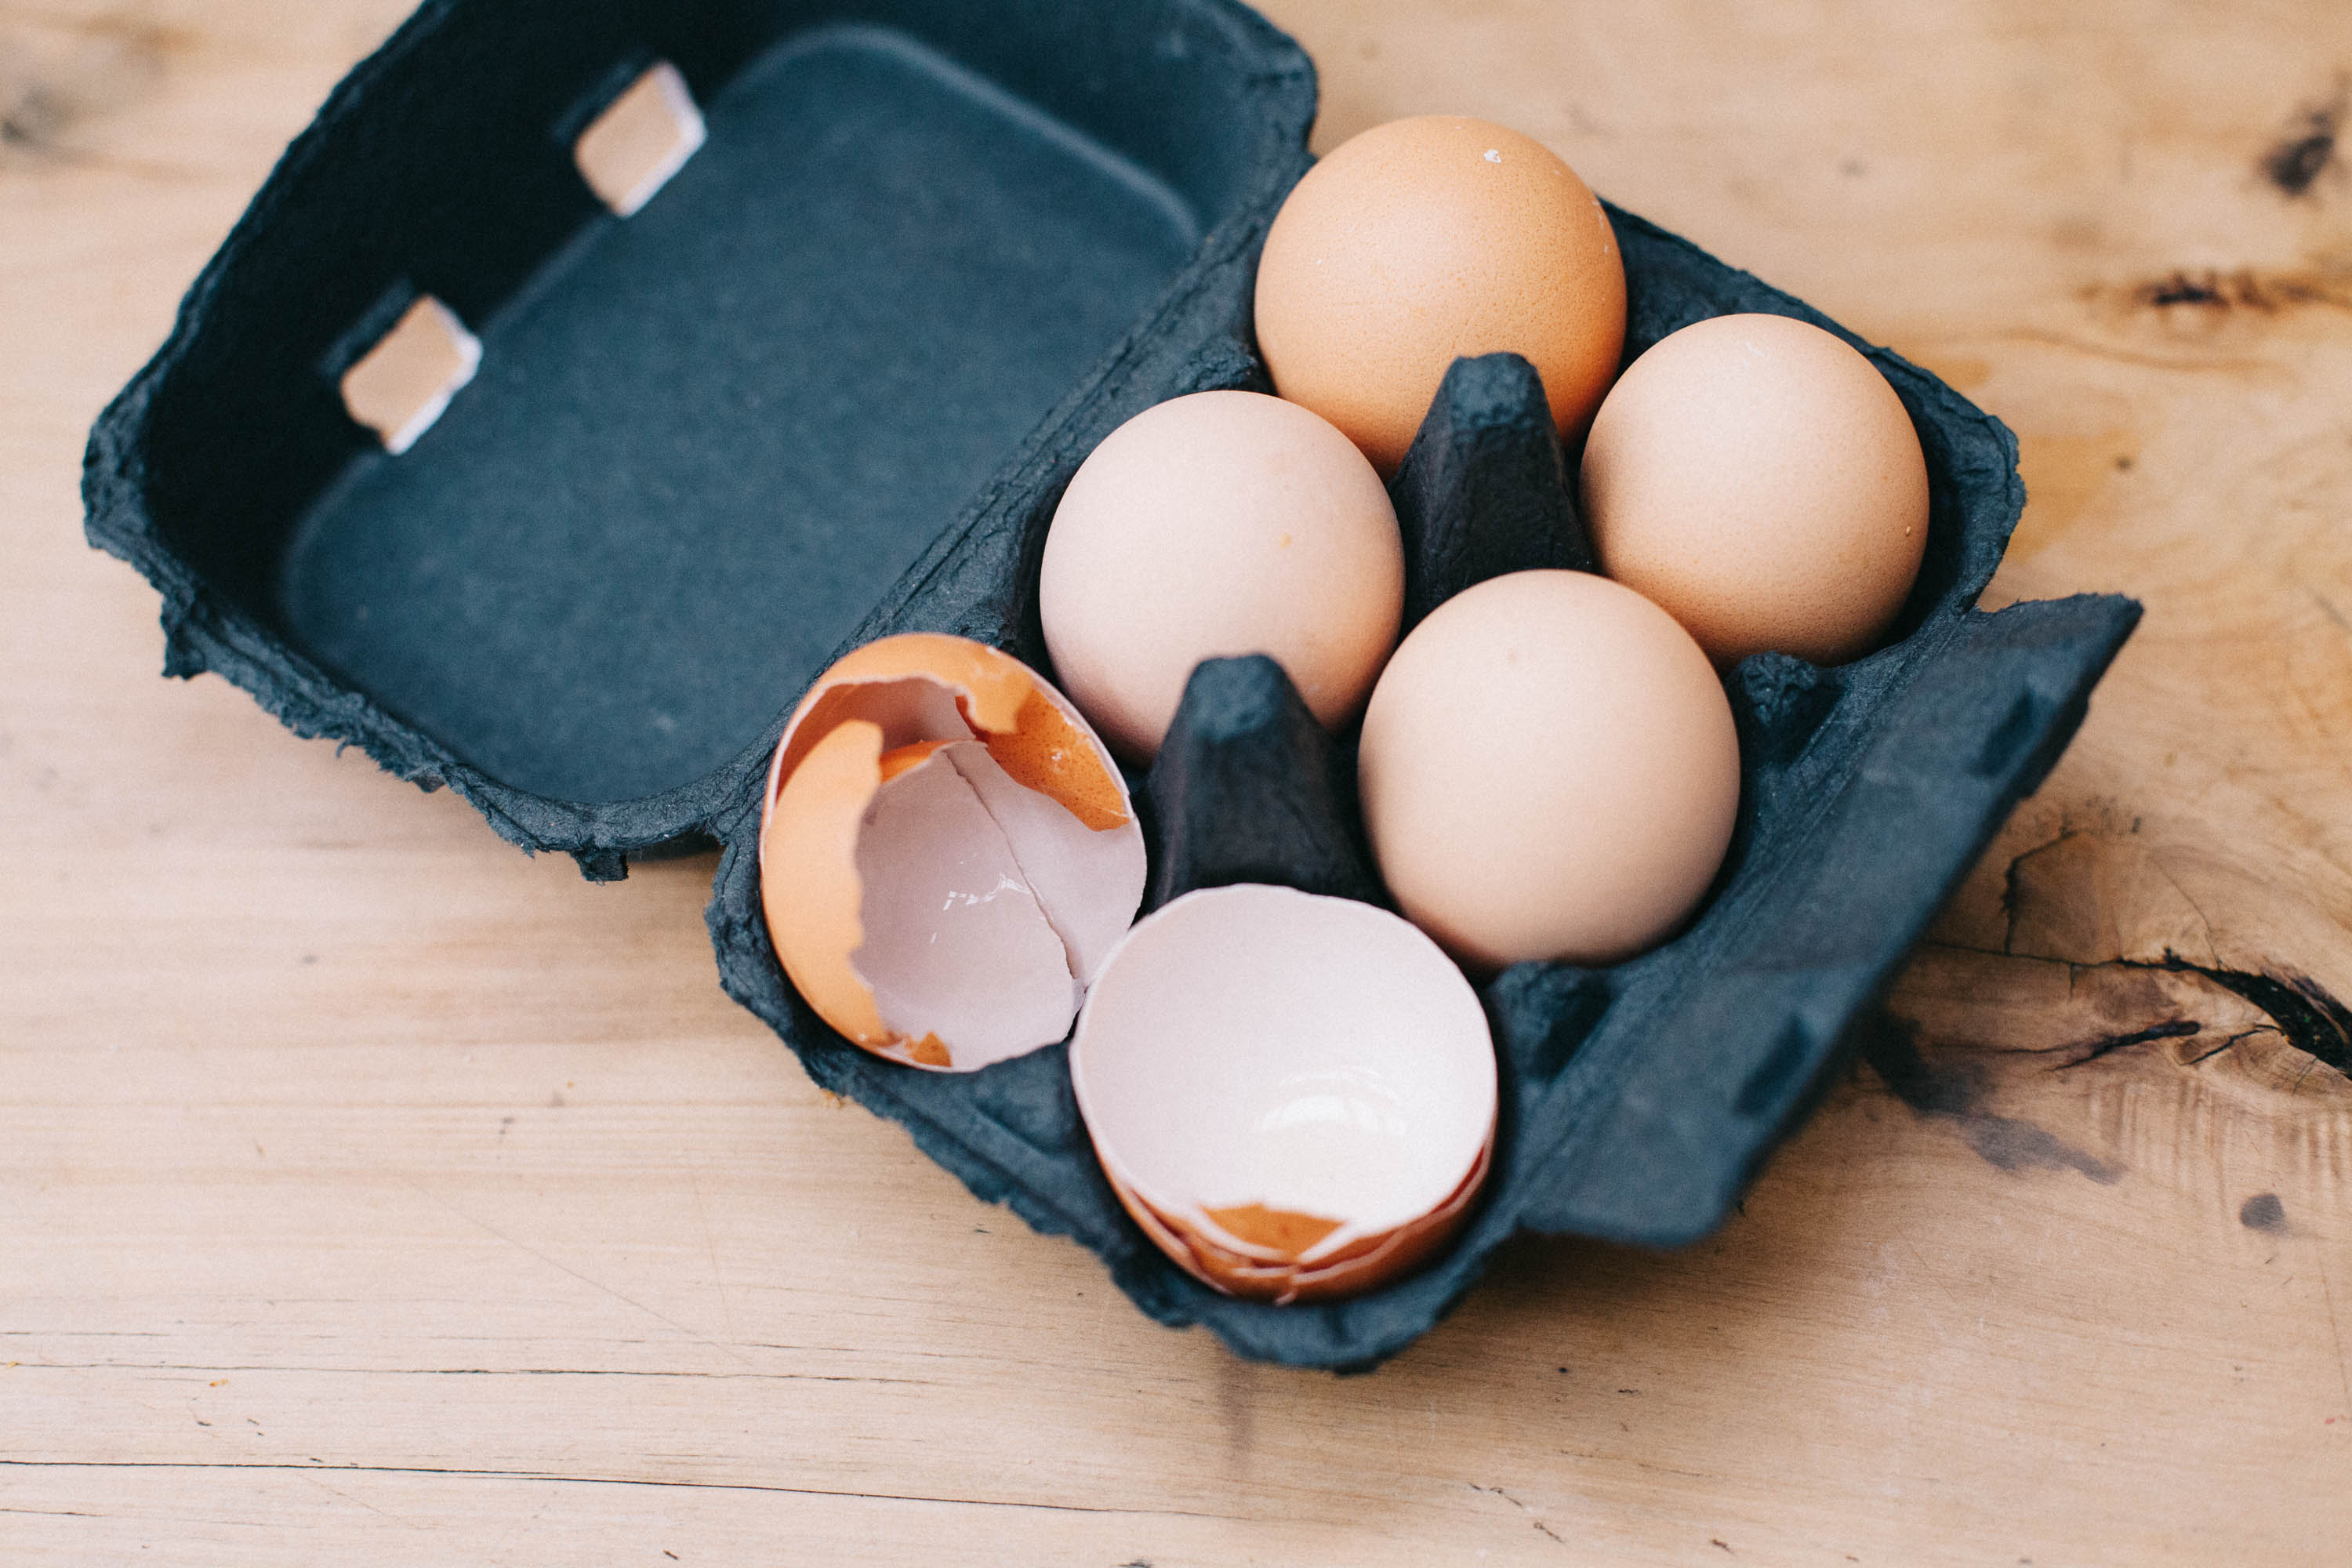 4 eggs and 2 empty egg shells in a black egg container on a wooden bench (c) Leonie Wise